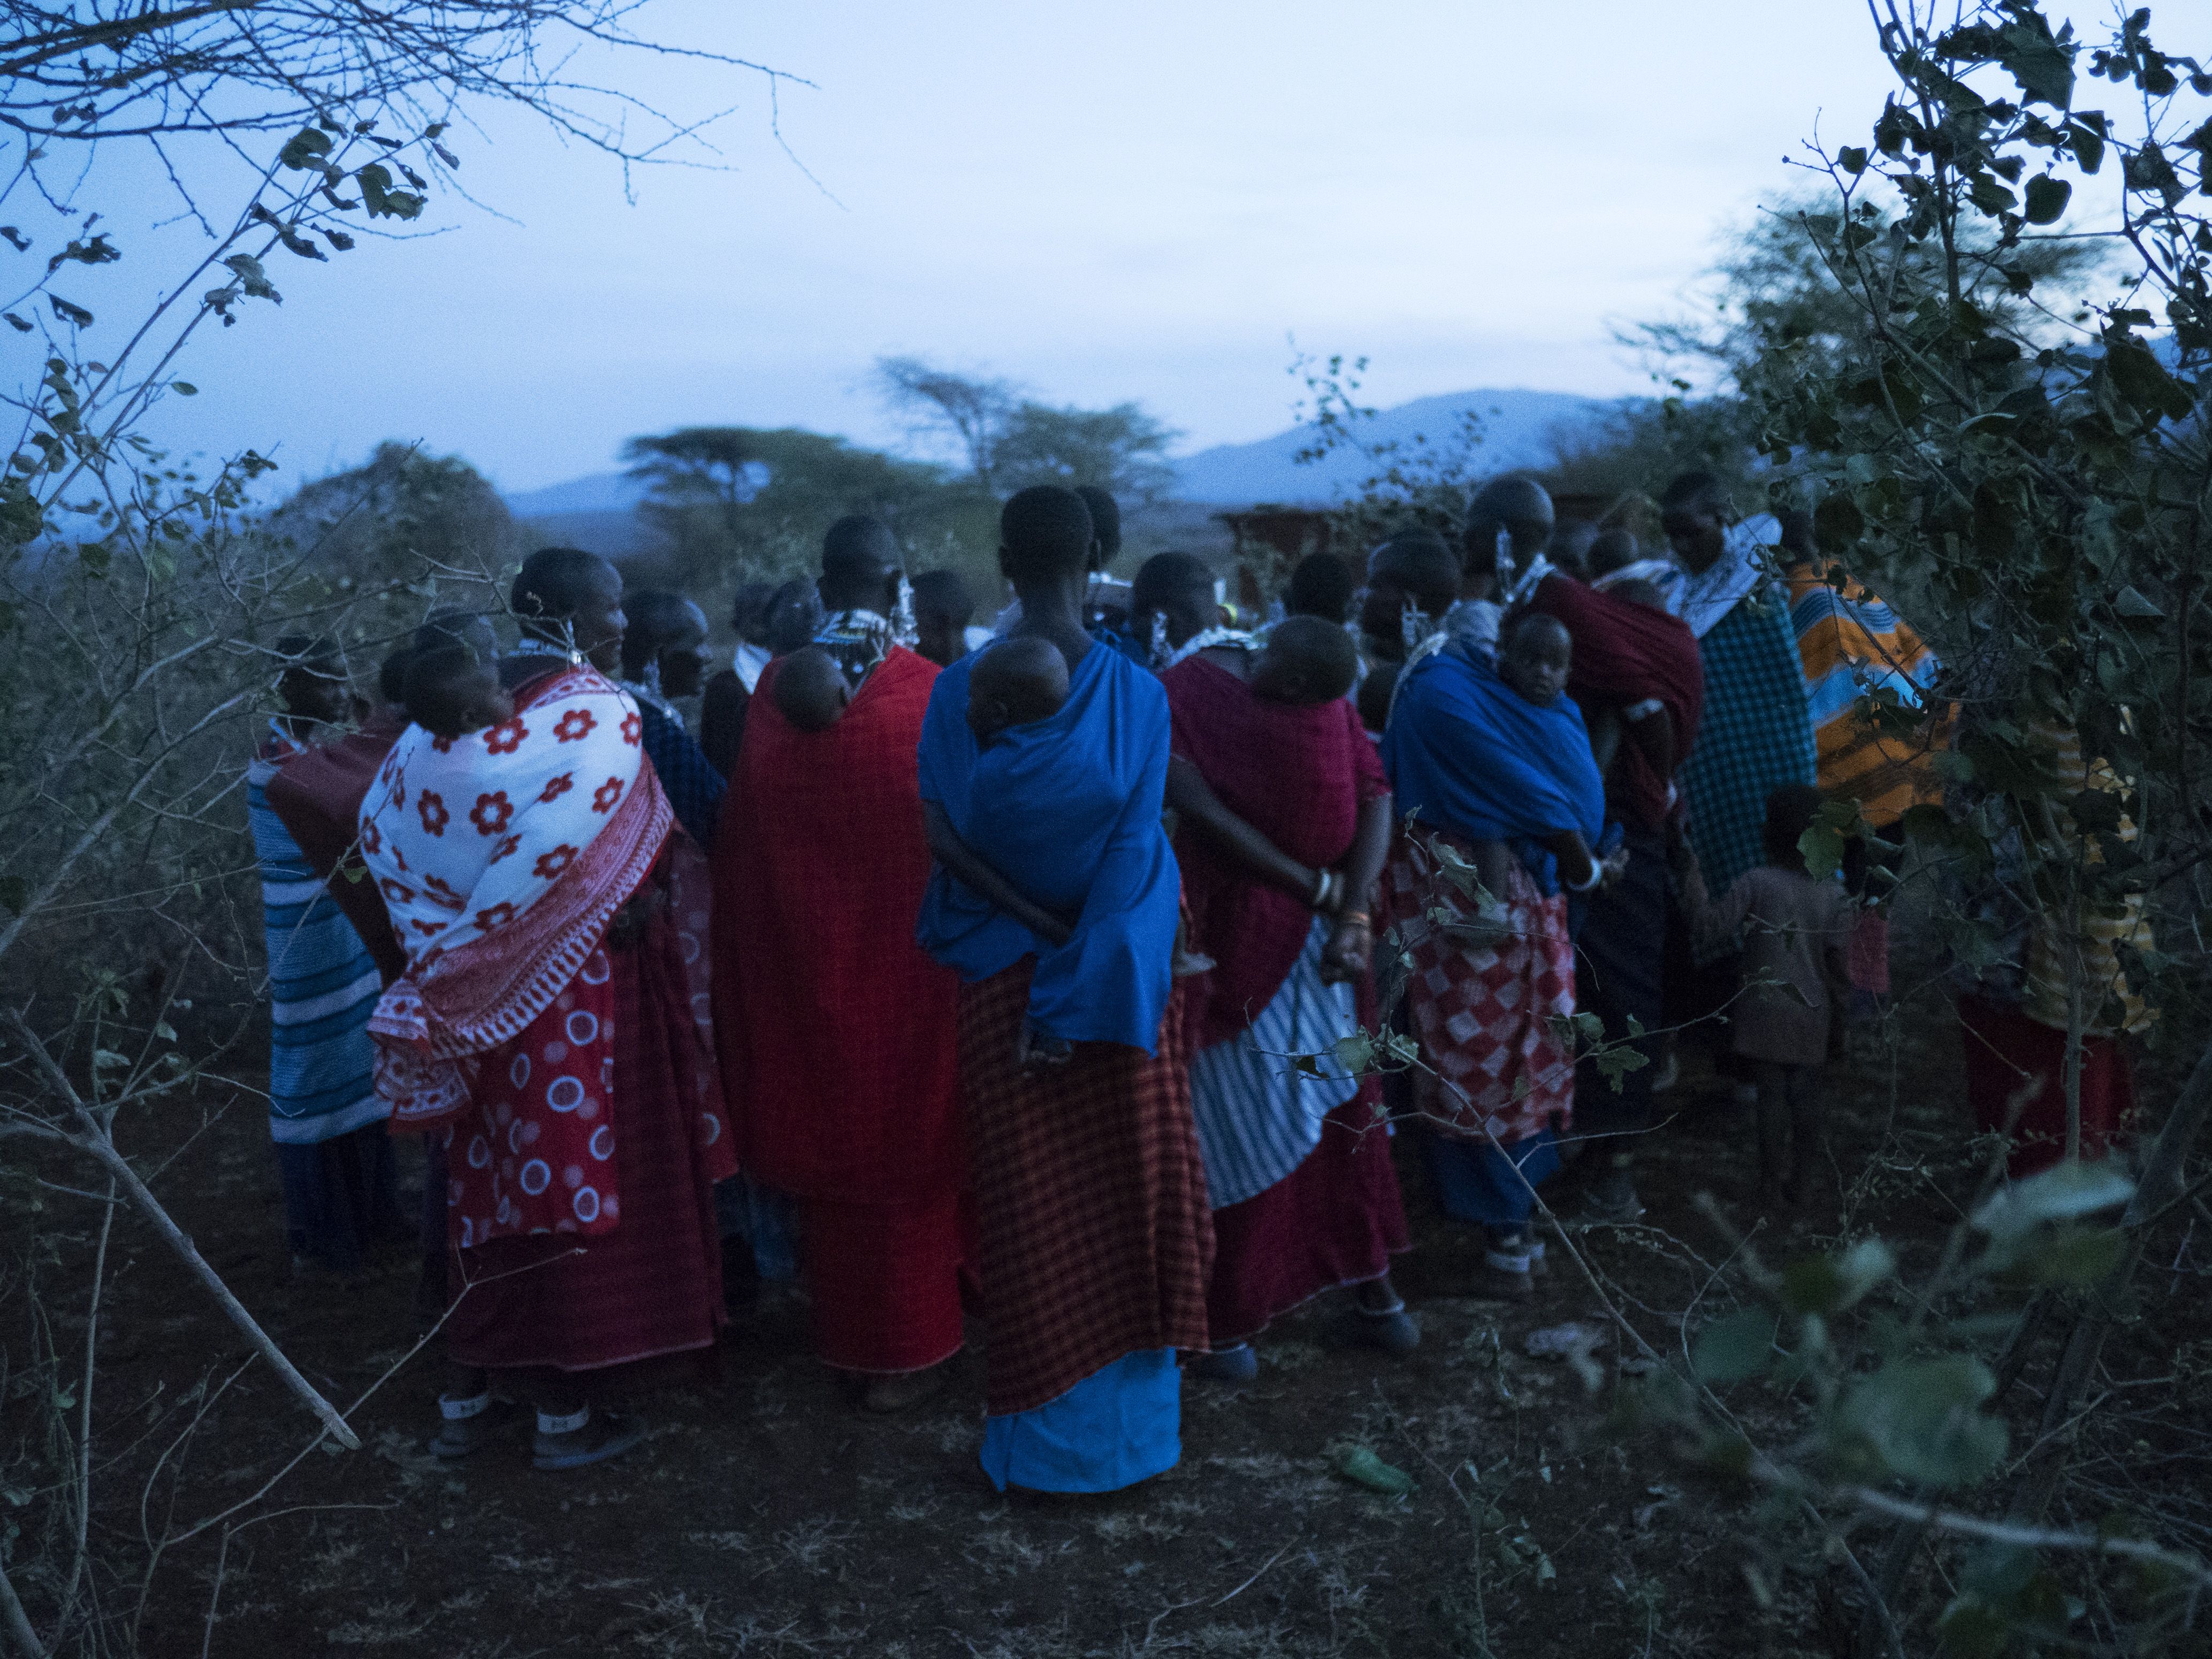 Maasai women preparing the slaughtering of a sheep to ask for rain. A recent drought and the dislocation of their traditional grazing land has created difficulties. Image by Thomas Dworzak/Magnum Photos. Tanzania, 2018.